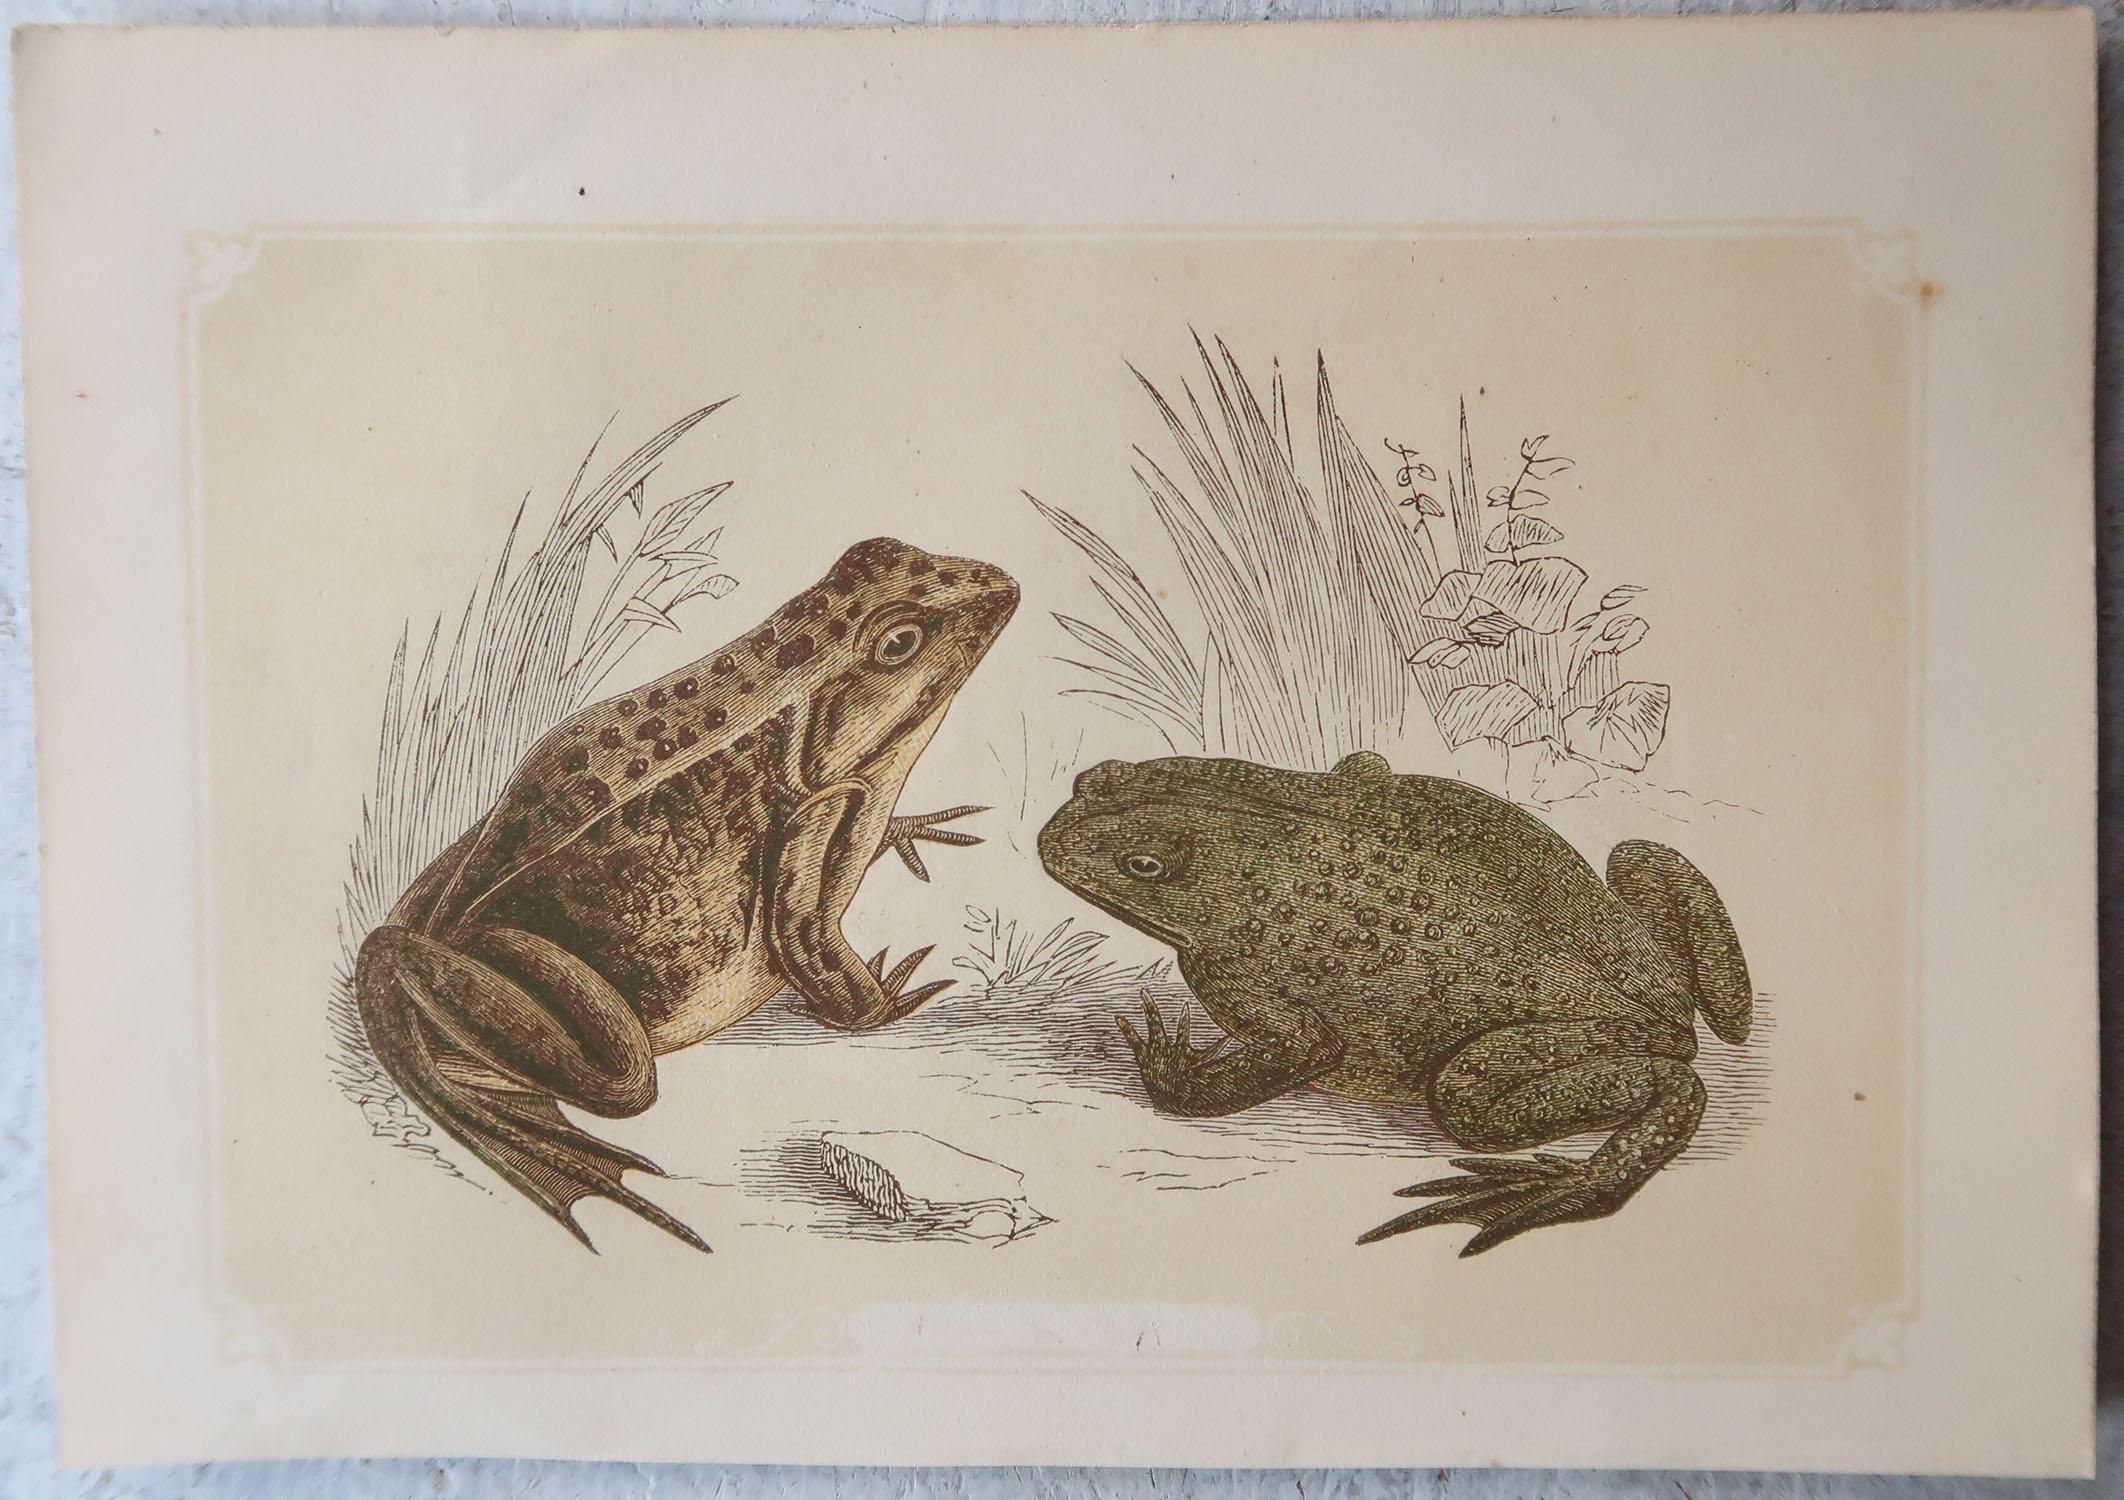 Great images of reptiles

Unframed. It gives you the option of perhaps making a set up using your own choice of frames.

Lithographs with original color.

Published by Tallis circa 1850

Crudely inscribed titles have been erased at the